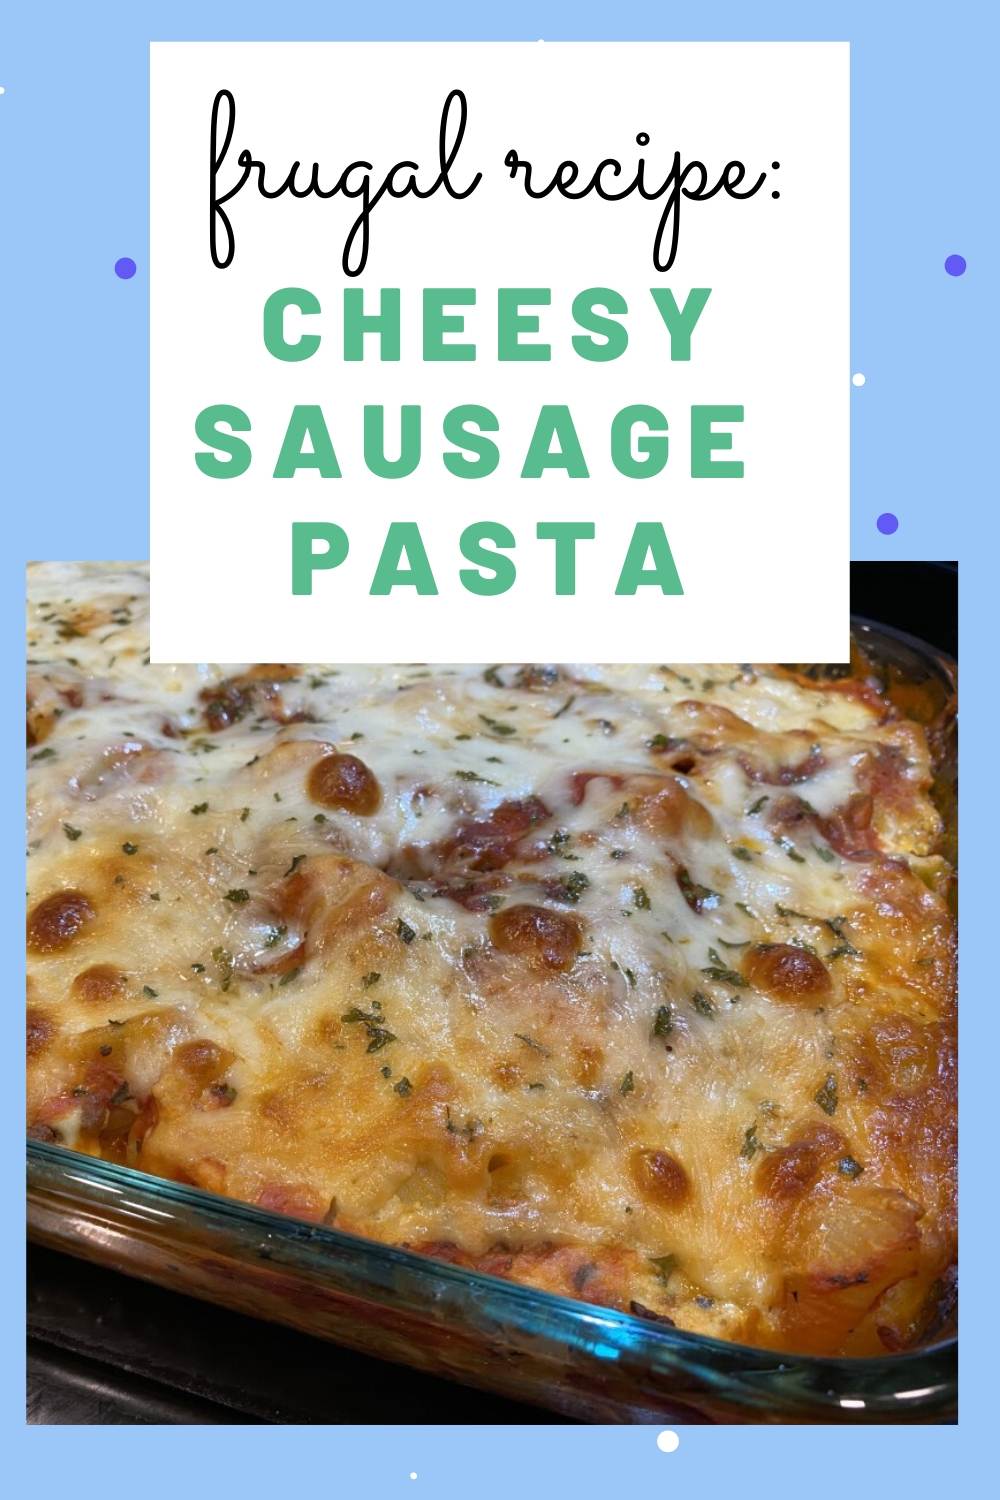 If you're looking for a simple pasta dish that feeds a crowd, look no further than this cheesy sausage pasta bake! Serve it with salad and bread.